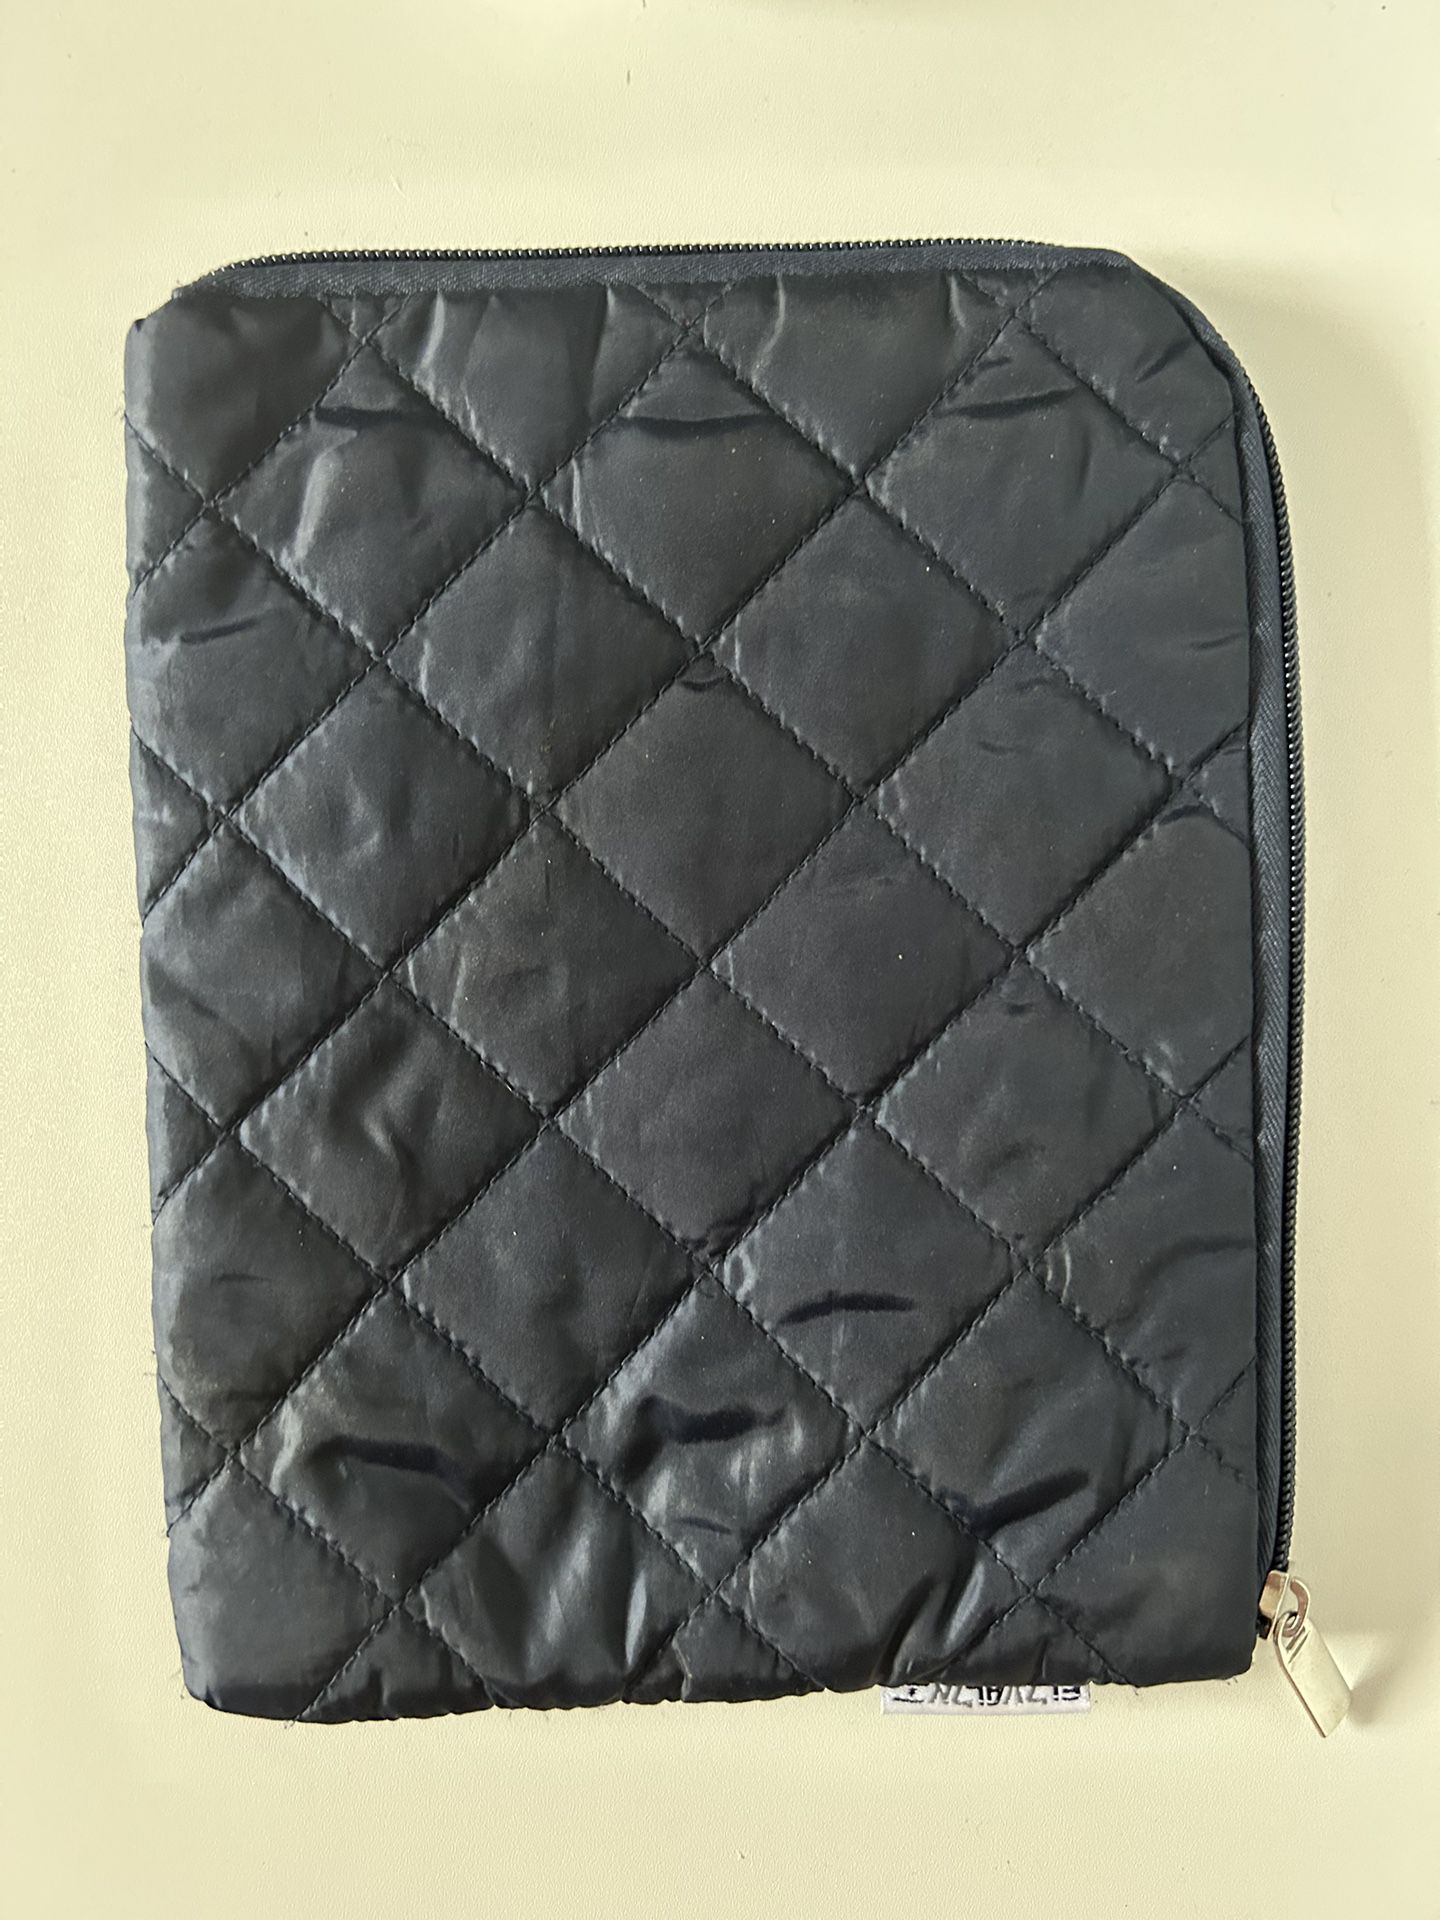 Travel / Cosmetics Bag - 3 For $10 for Sale in Brooklyn, NY - OfferUp